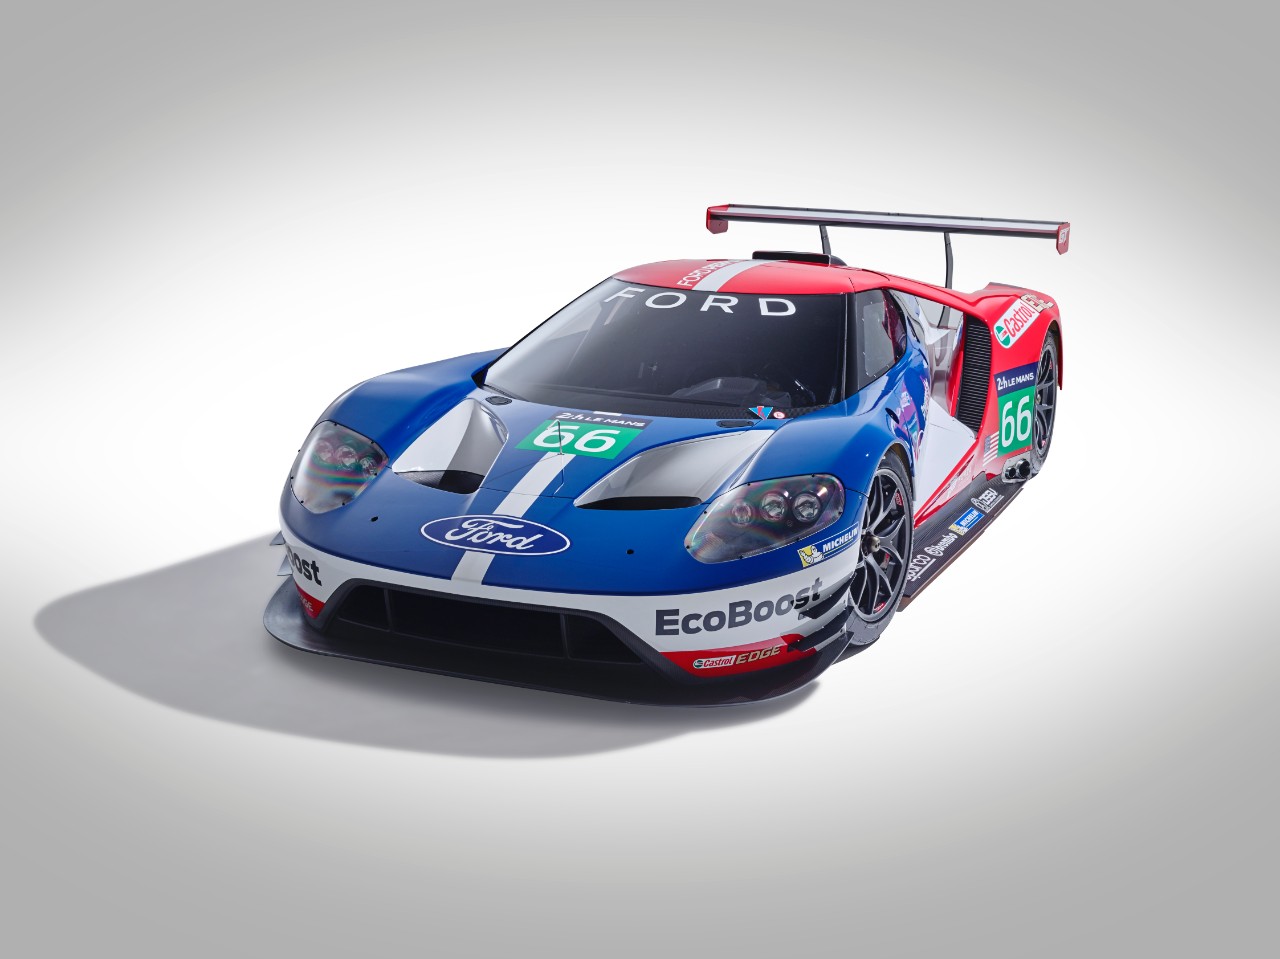 Unveiled: The Ford GT LM-GTE Pro Race Car – They Will Be At LeMans For 2016!